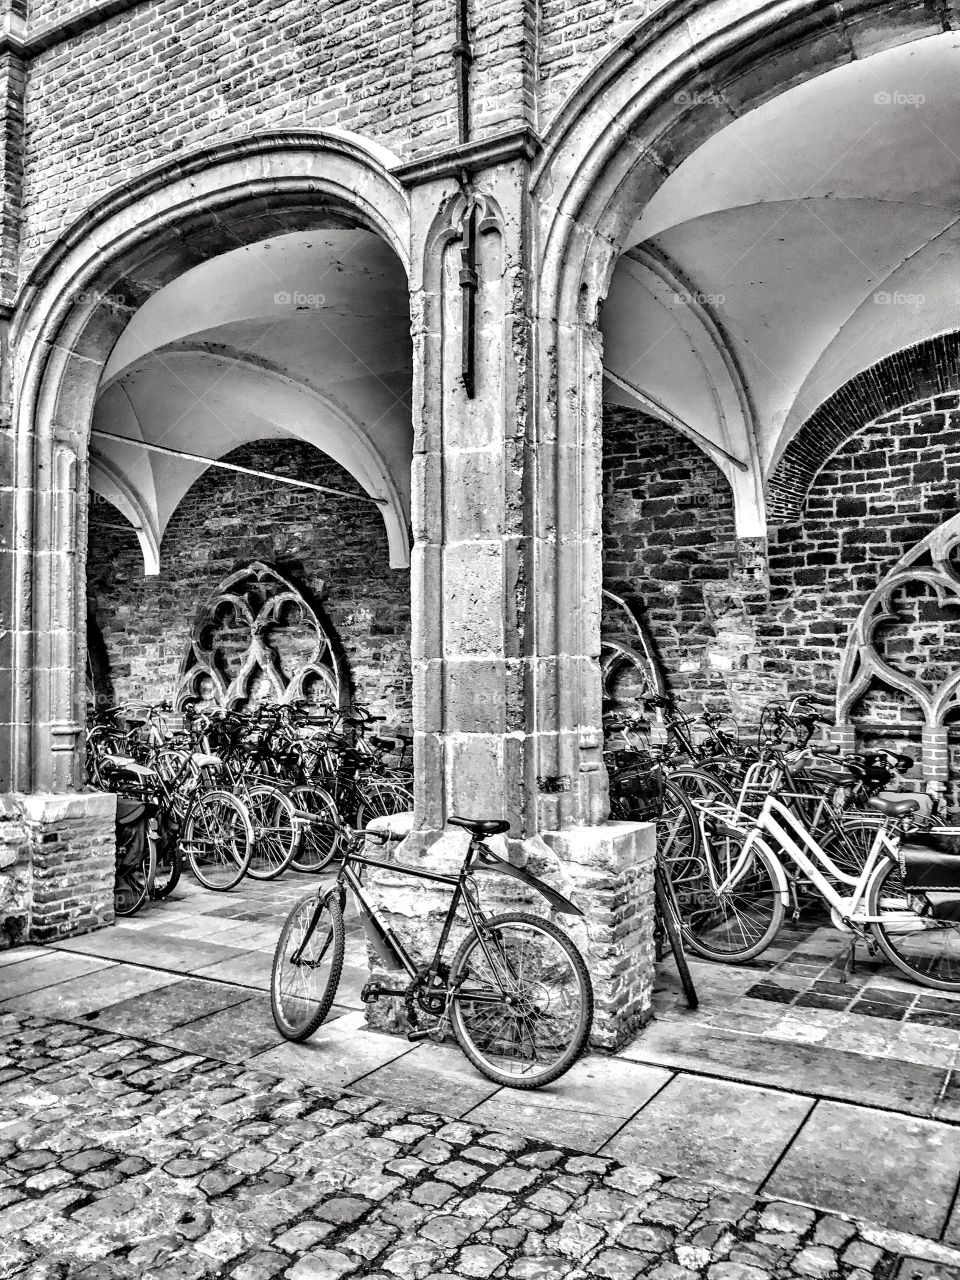 Medieval bicycle parking ... Contradiction in term